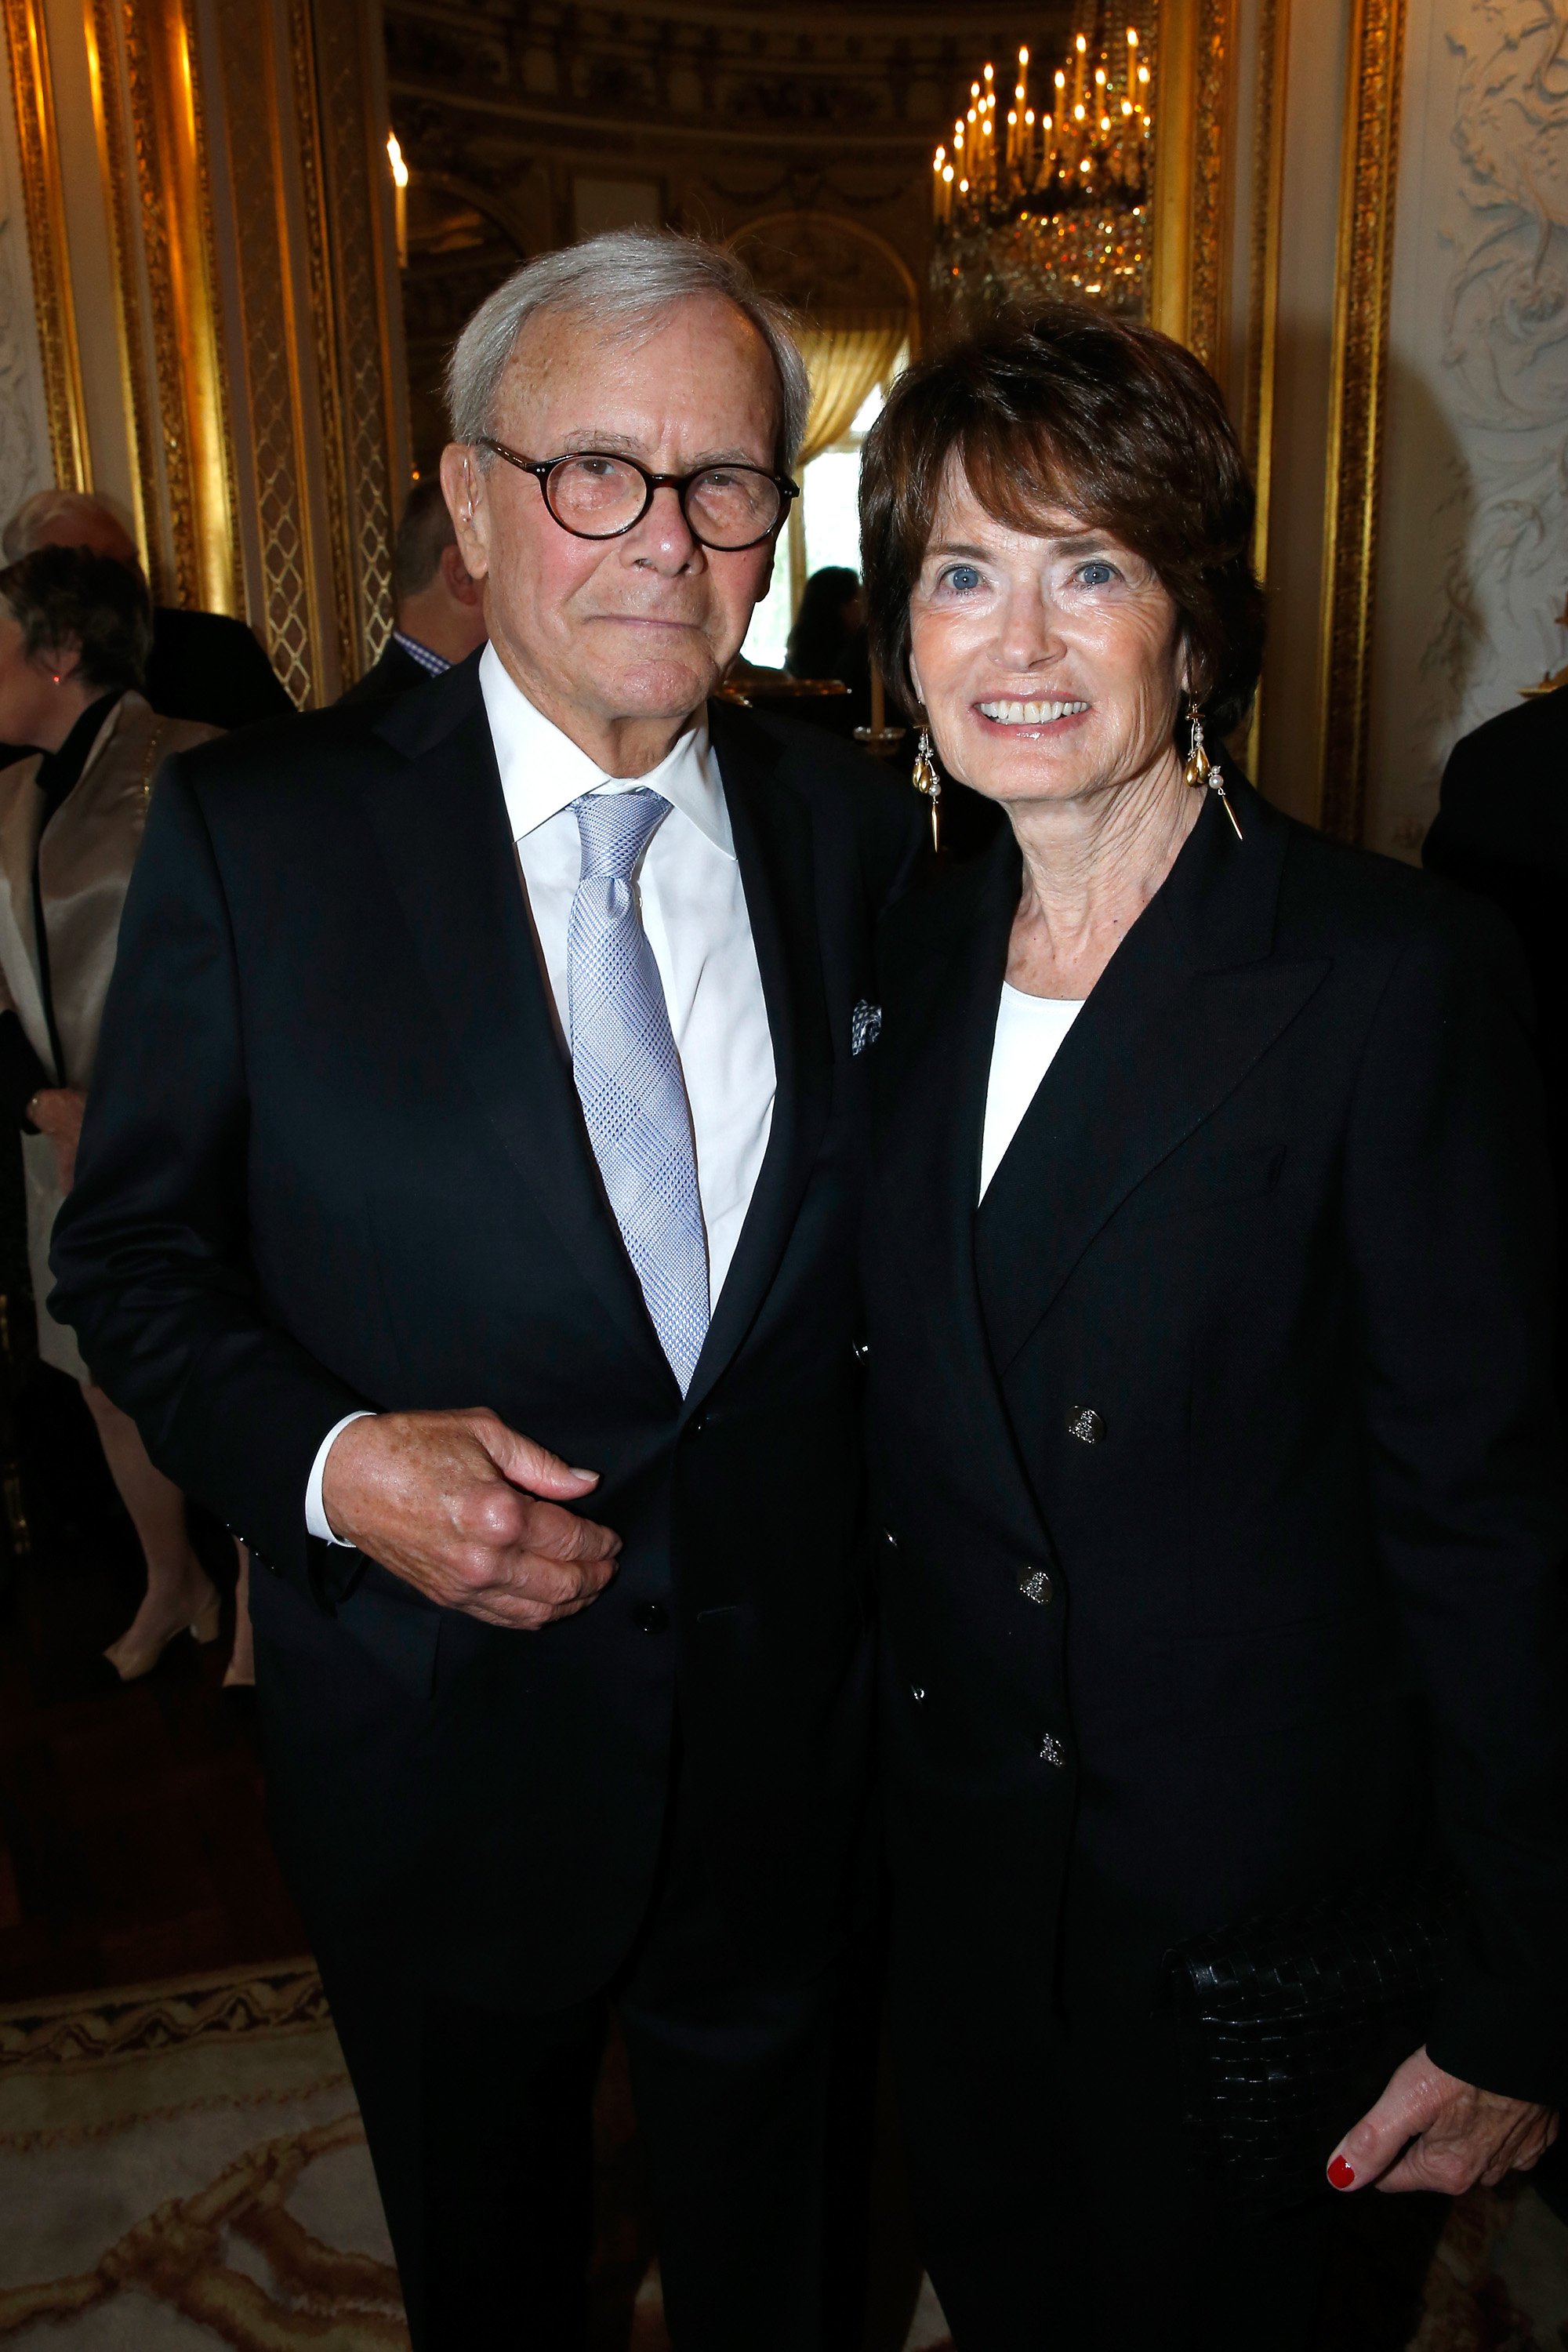     Tom Brokaw and wife Meredith Lynn Auld attend Tom Hanks, Tom Brokaw & Gordon "pseudo" Mueller receives the Legion of Honor medal at the Palace of the Legion of Honor in Paris on May 19, 2016 |  Source: Getty Images